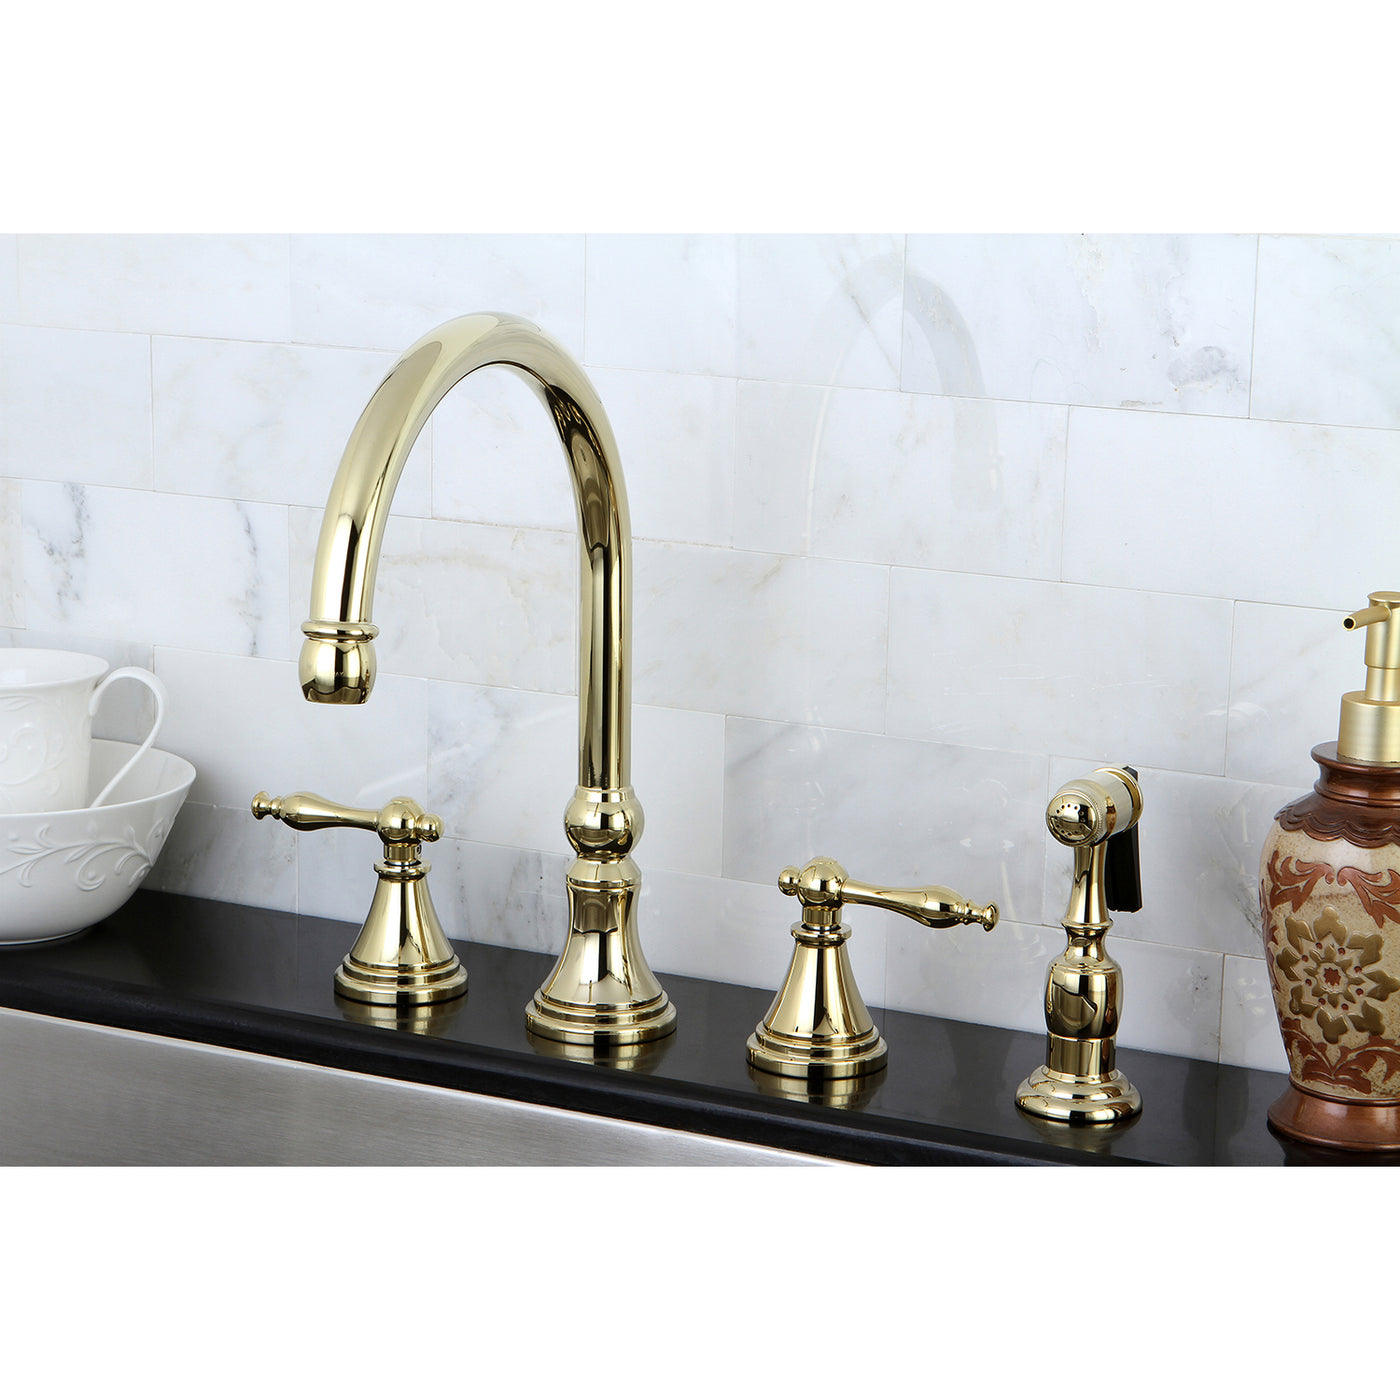 Elements of Design ES2792NLBS Widespread Kitchen Faucet with Brass Sprayer, Polished Brass